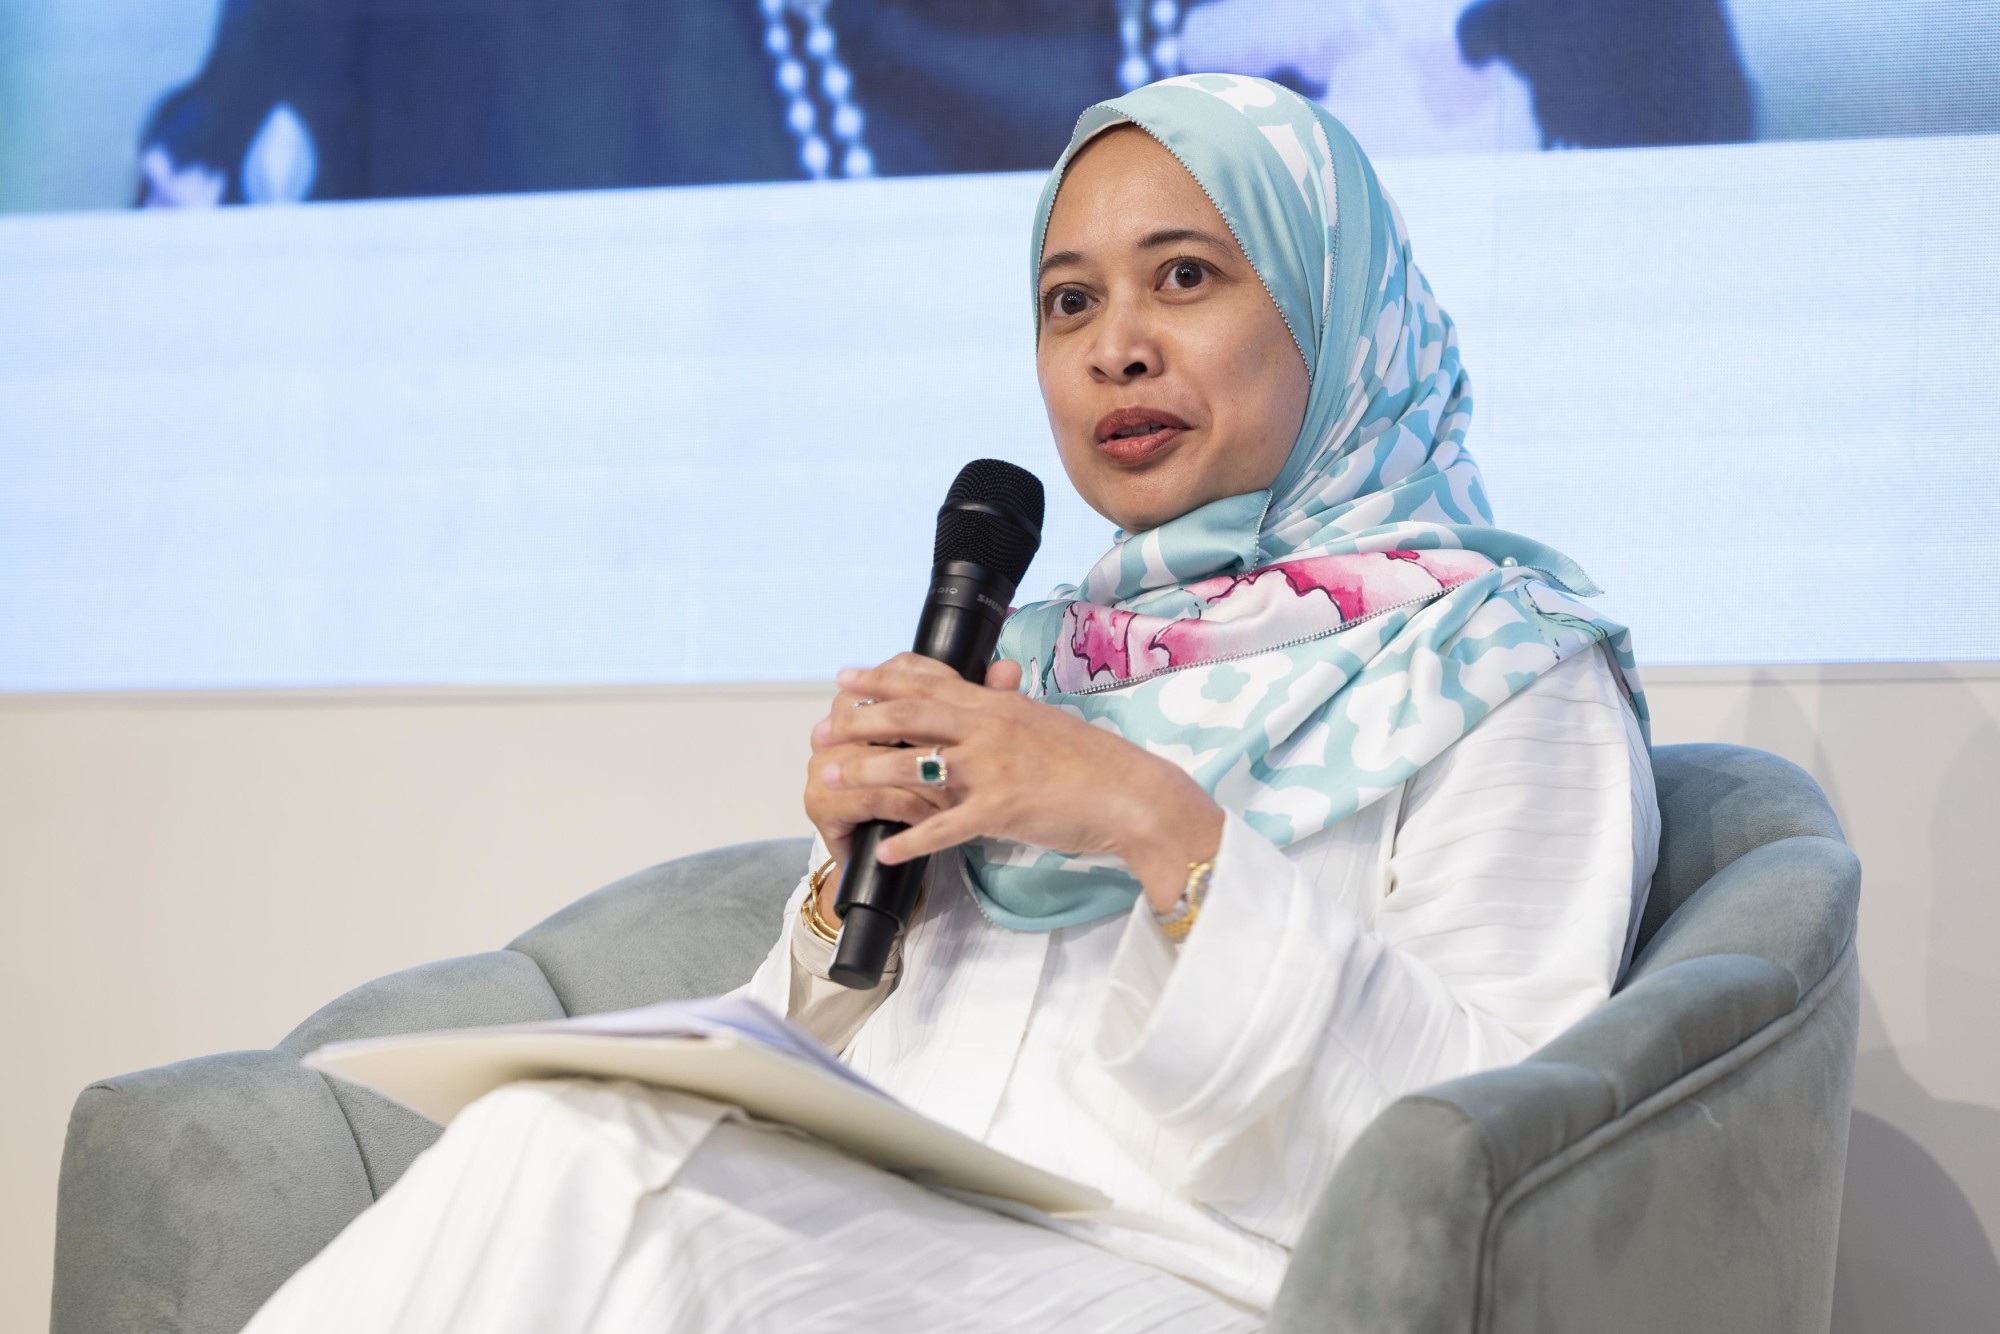 Maya, Managing Director and CEO of the Amanie Advisors’ Global Office, Dubai speaks during the Women in Arabia and Islam event - How Islam Inspires Sustainable Development at the Women’s Pavilion m35243